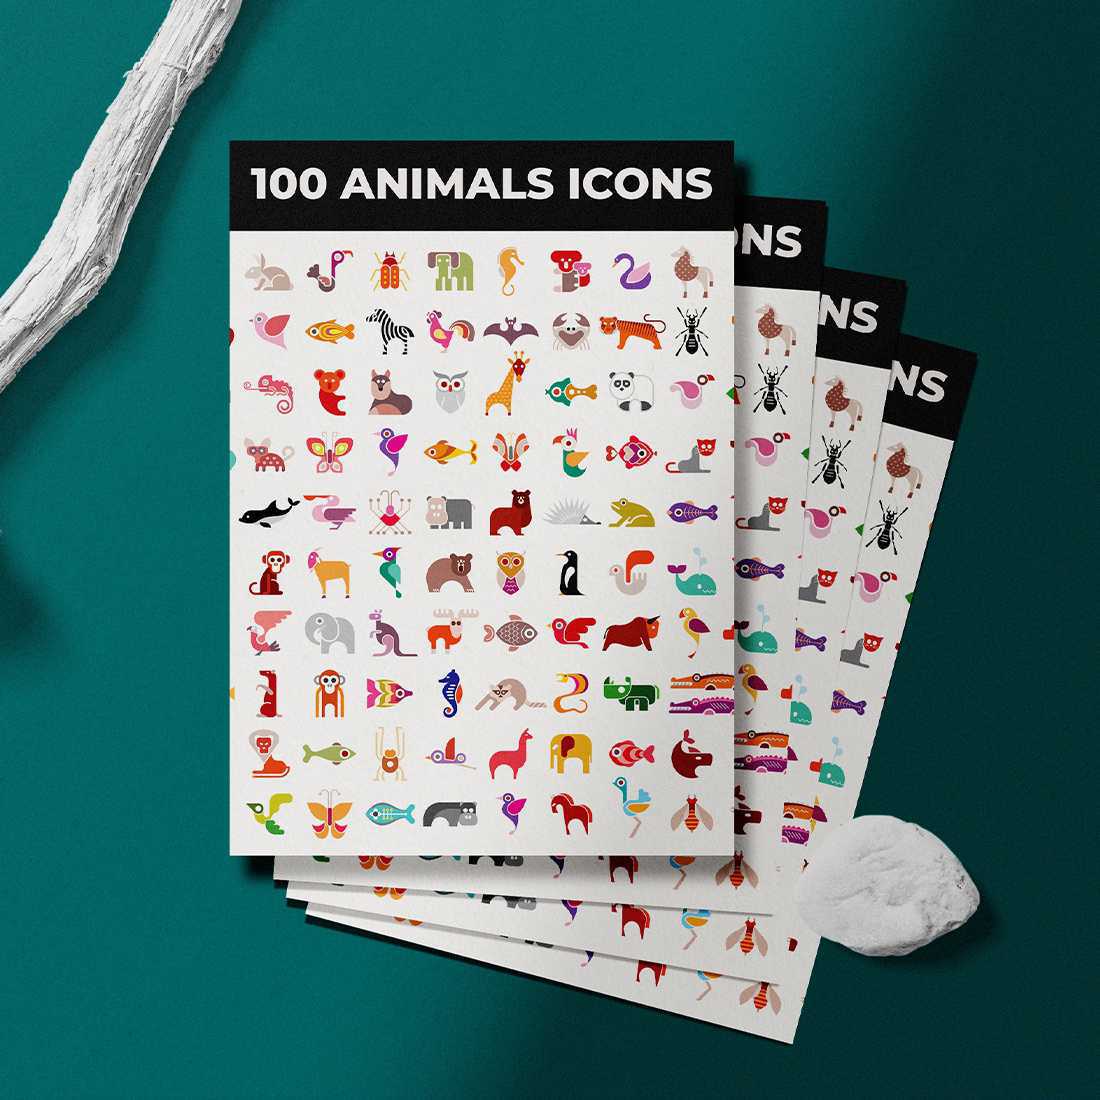 Animals Vector Icons Designs cover image.